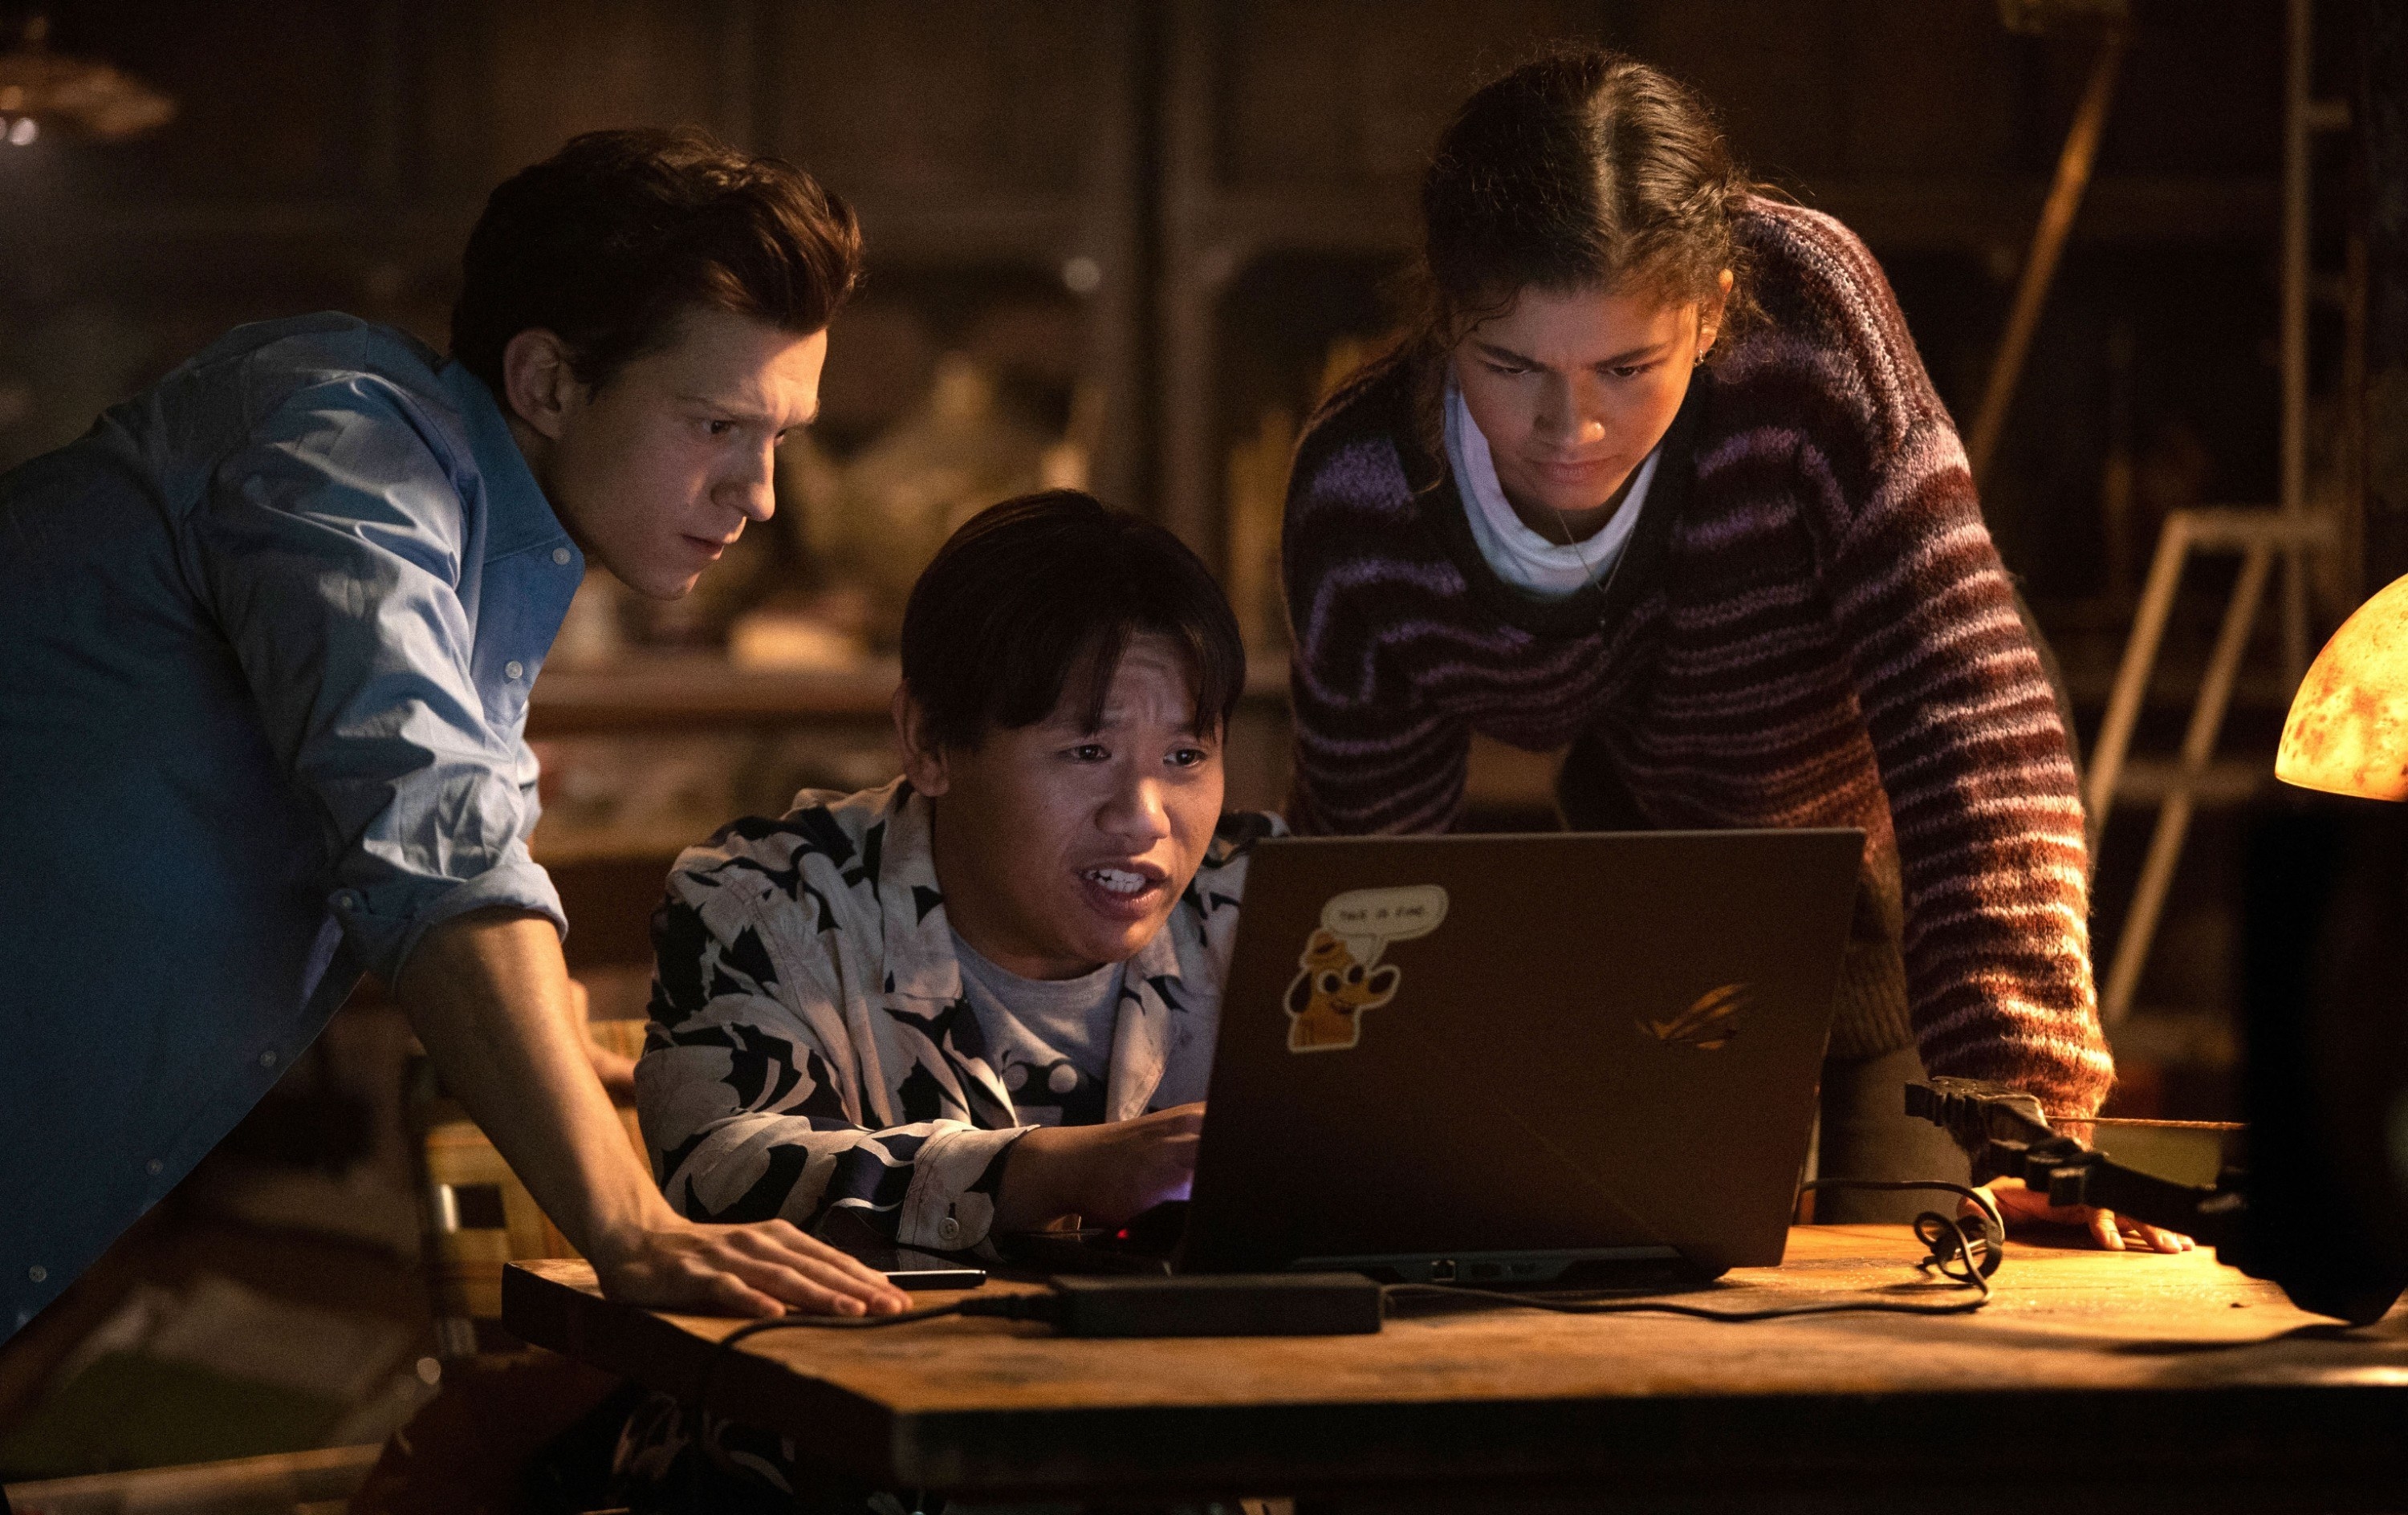 Ned at his laptop, with Peter and MJ looking over his shoulder